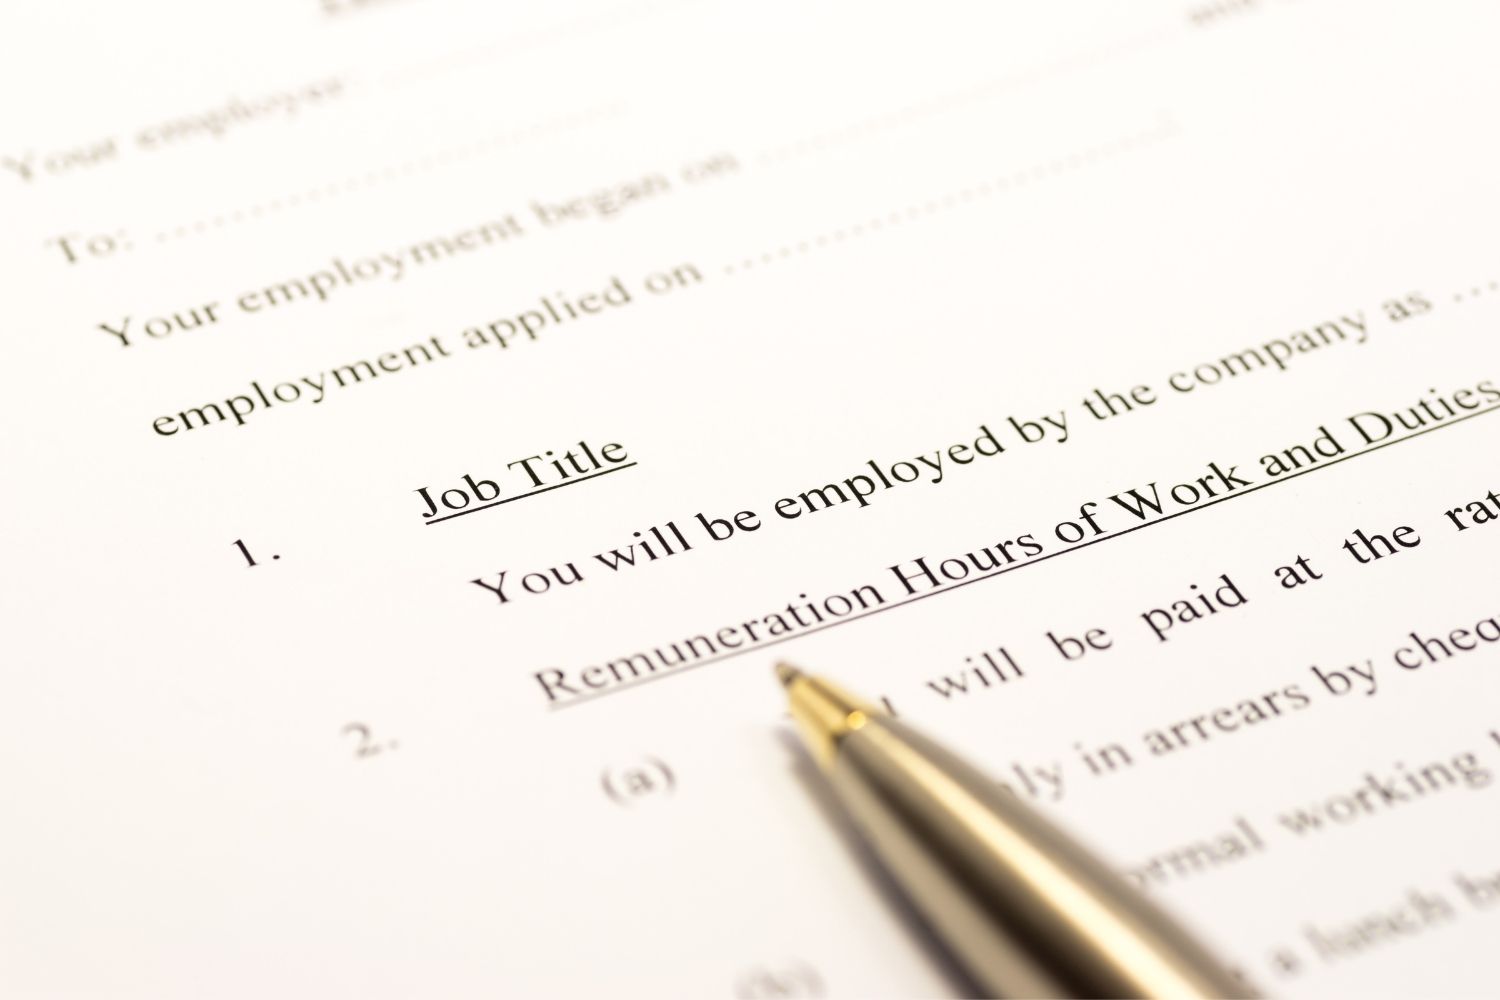 New fixed term contract provisions under the Fair Work Act 